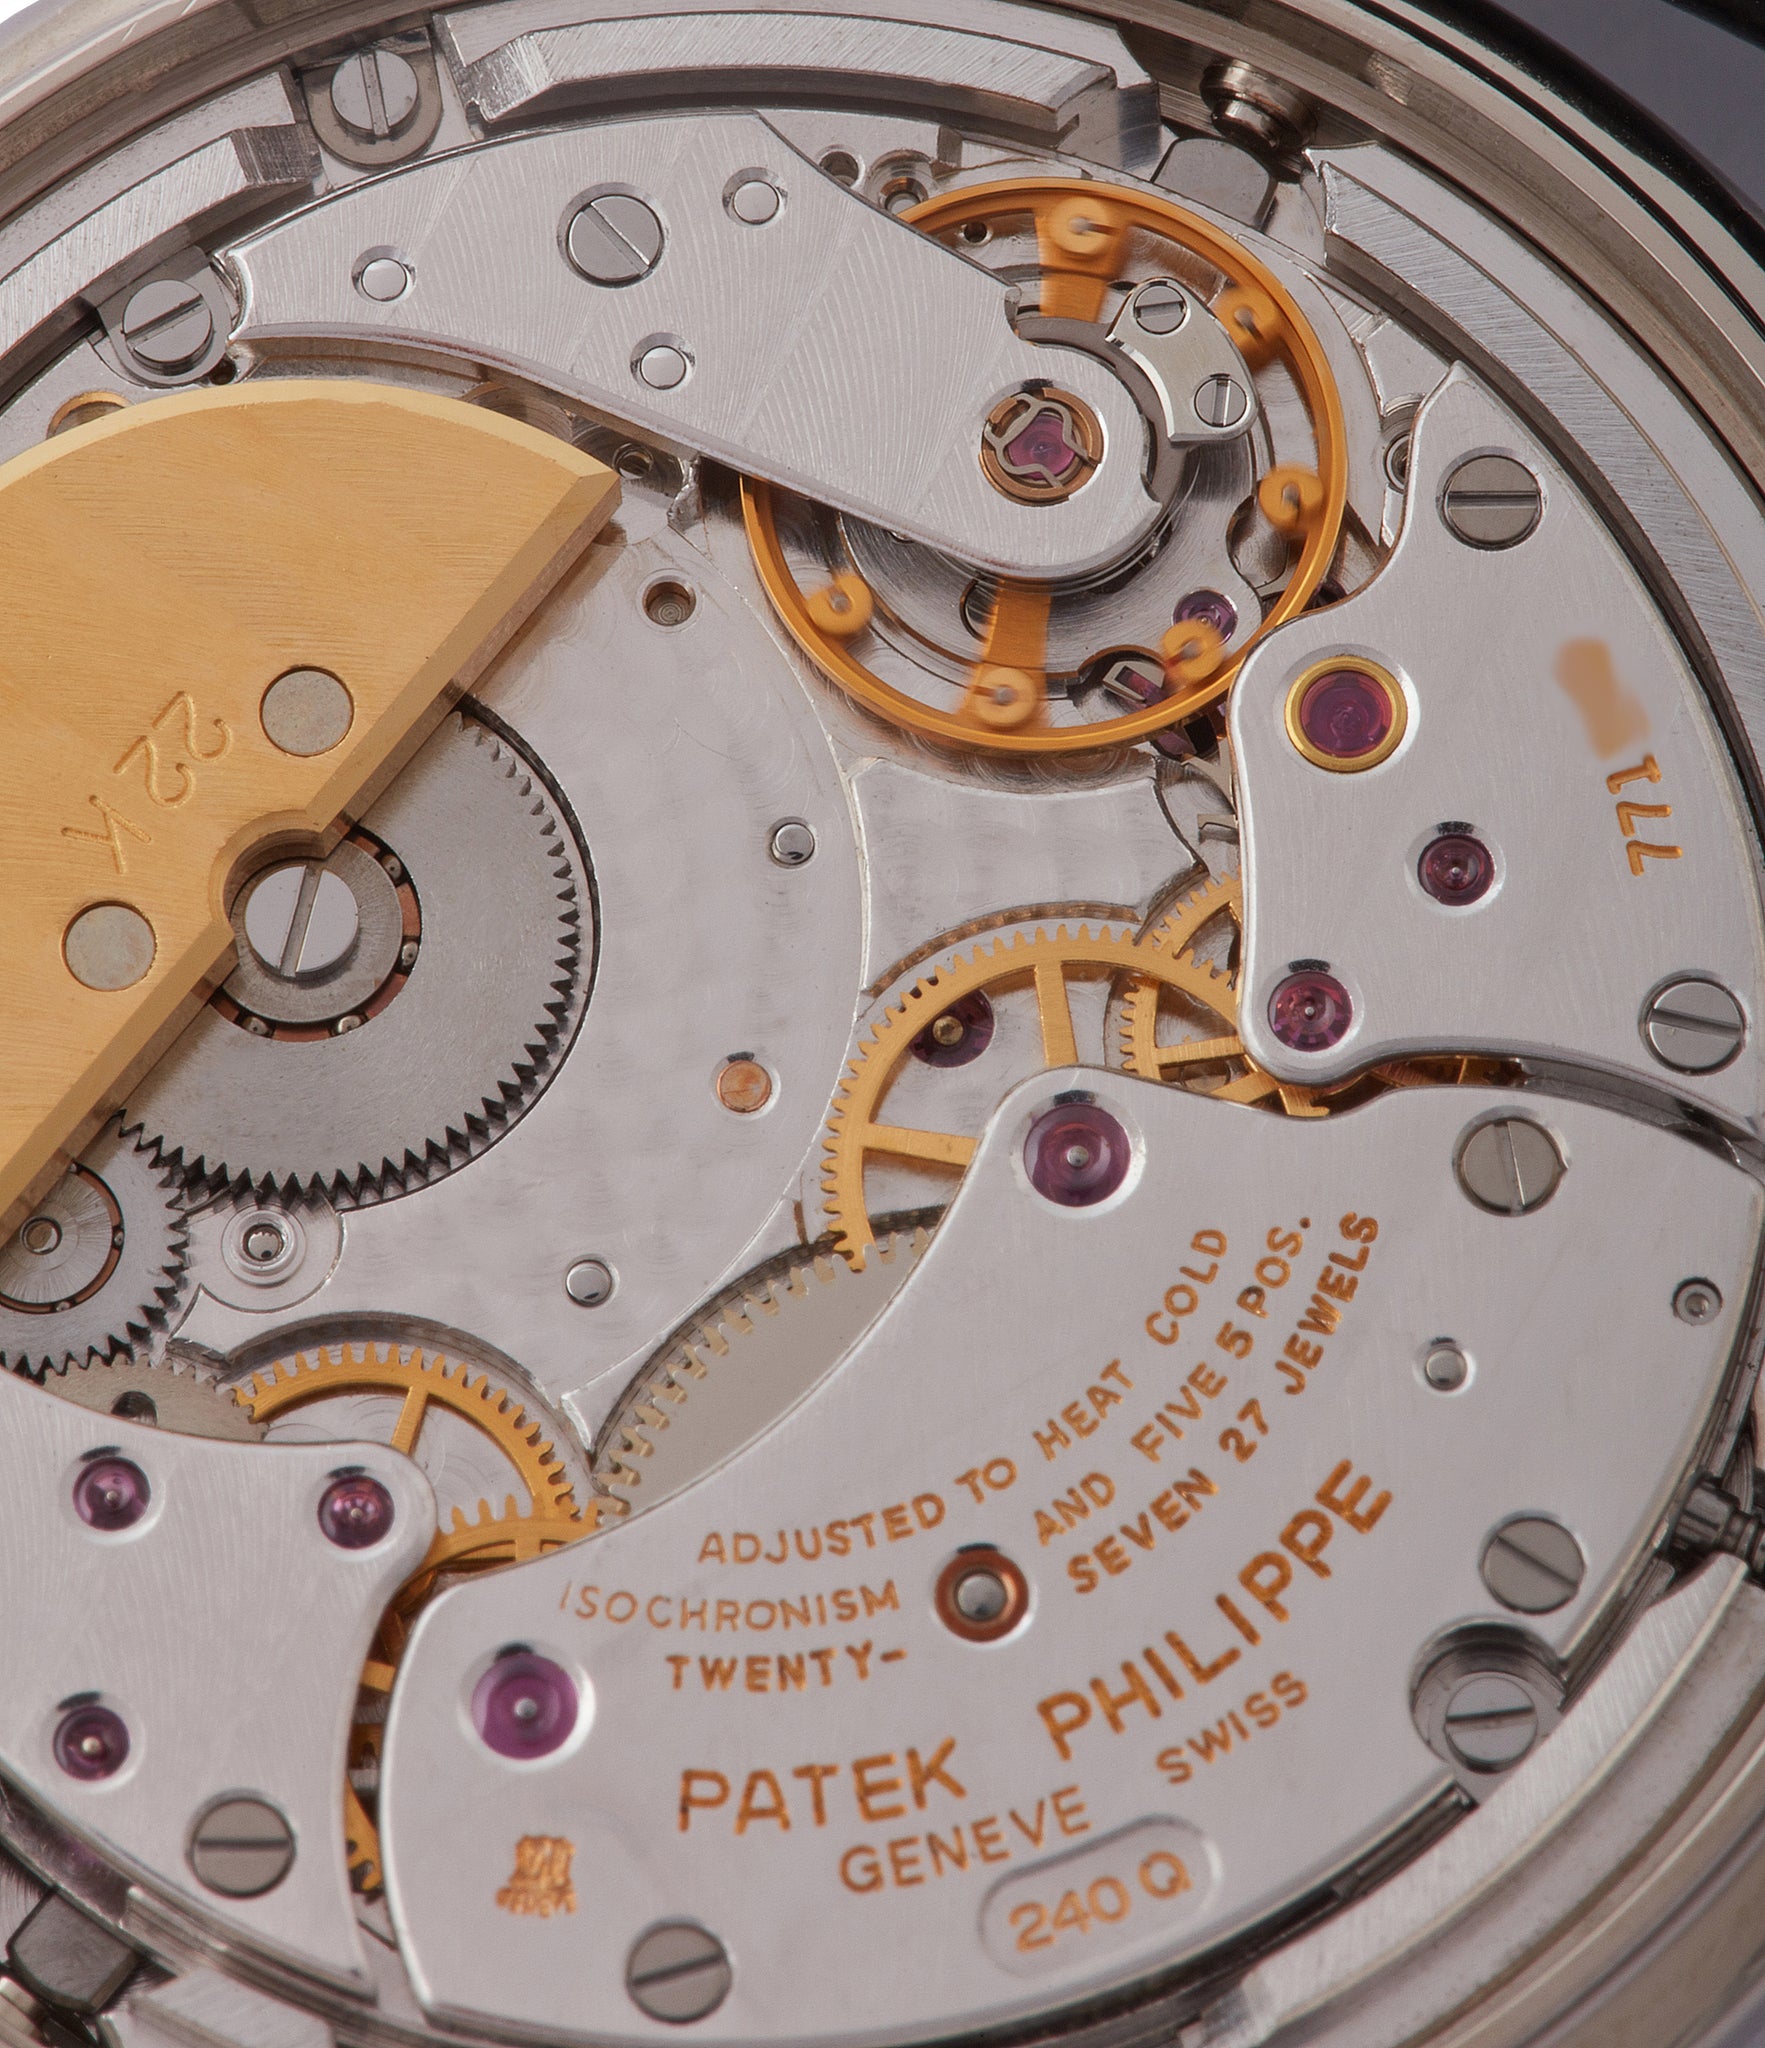 240Q movement Patek Philippe 3940G Perpetual Calendar vintage rare watch English dial for sale online at A Collected Man London UK specialist of rare watches